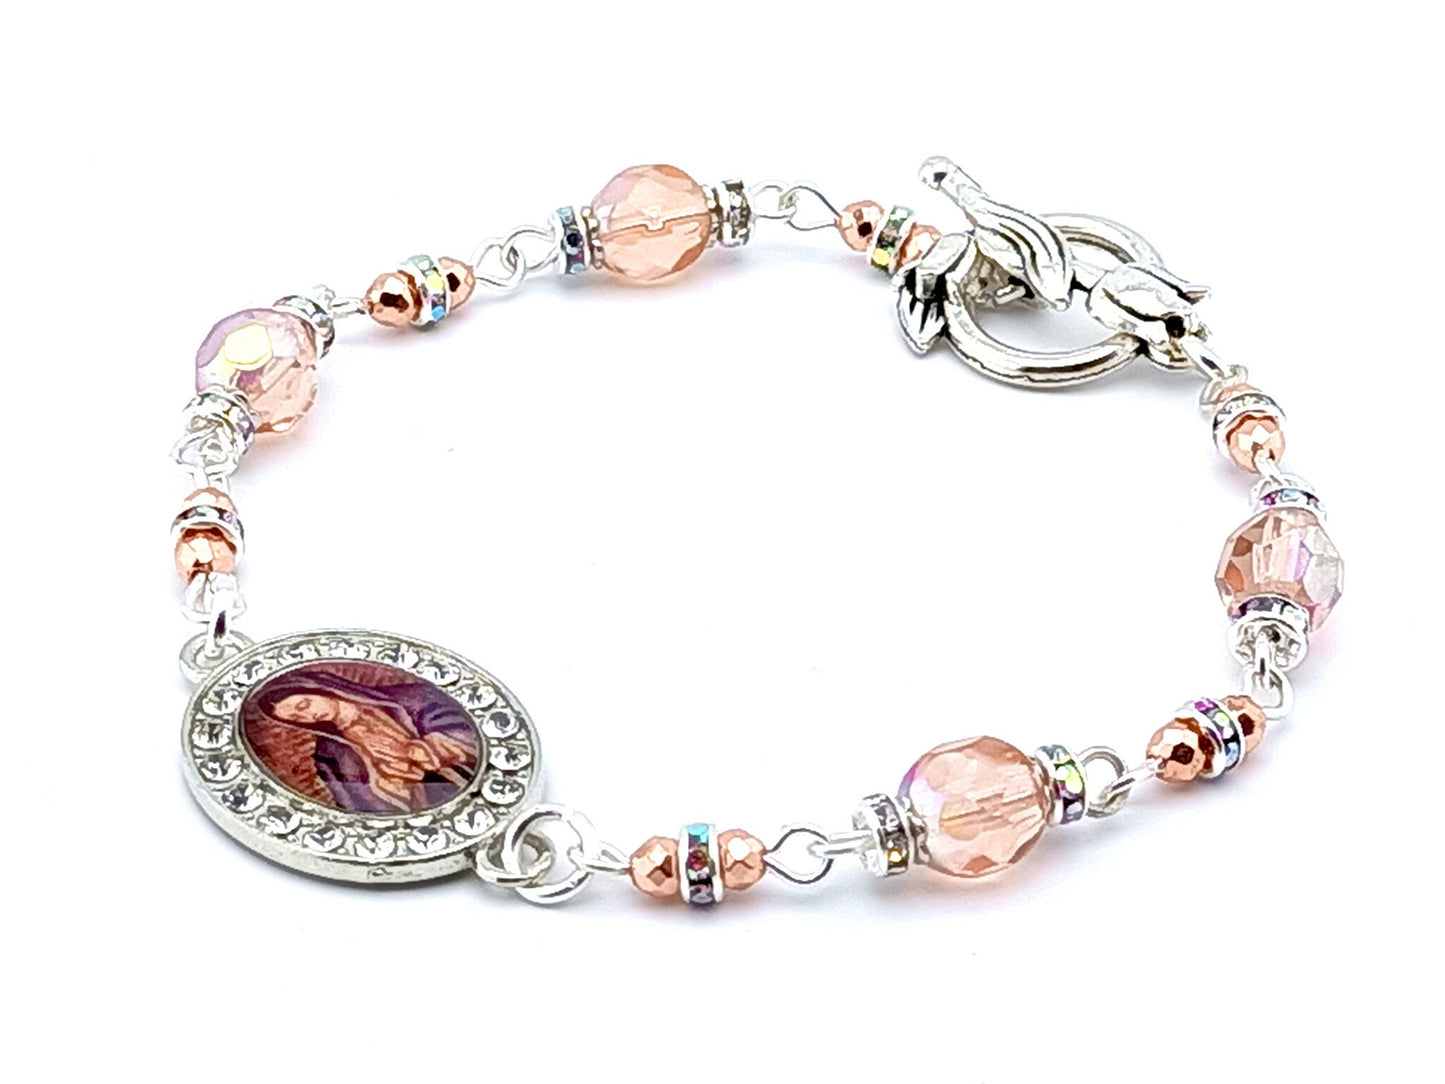 Our Lady of Guadalupe unique rosary beads bracelet with amber glass beads, silver clasp and picture medal.